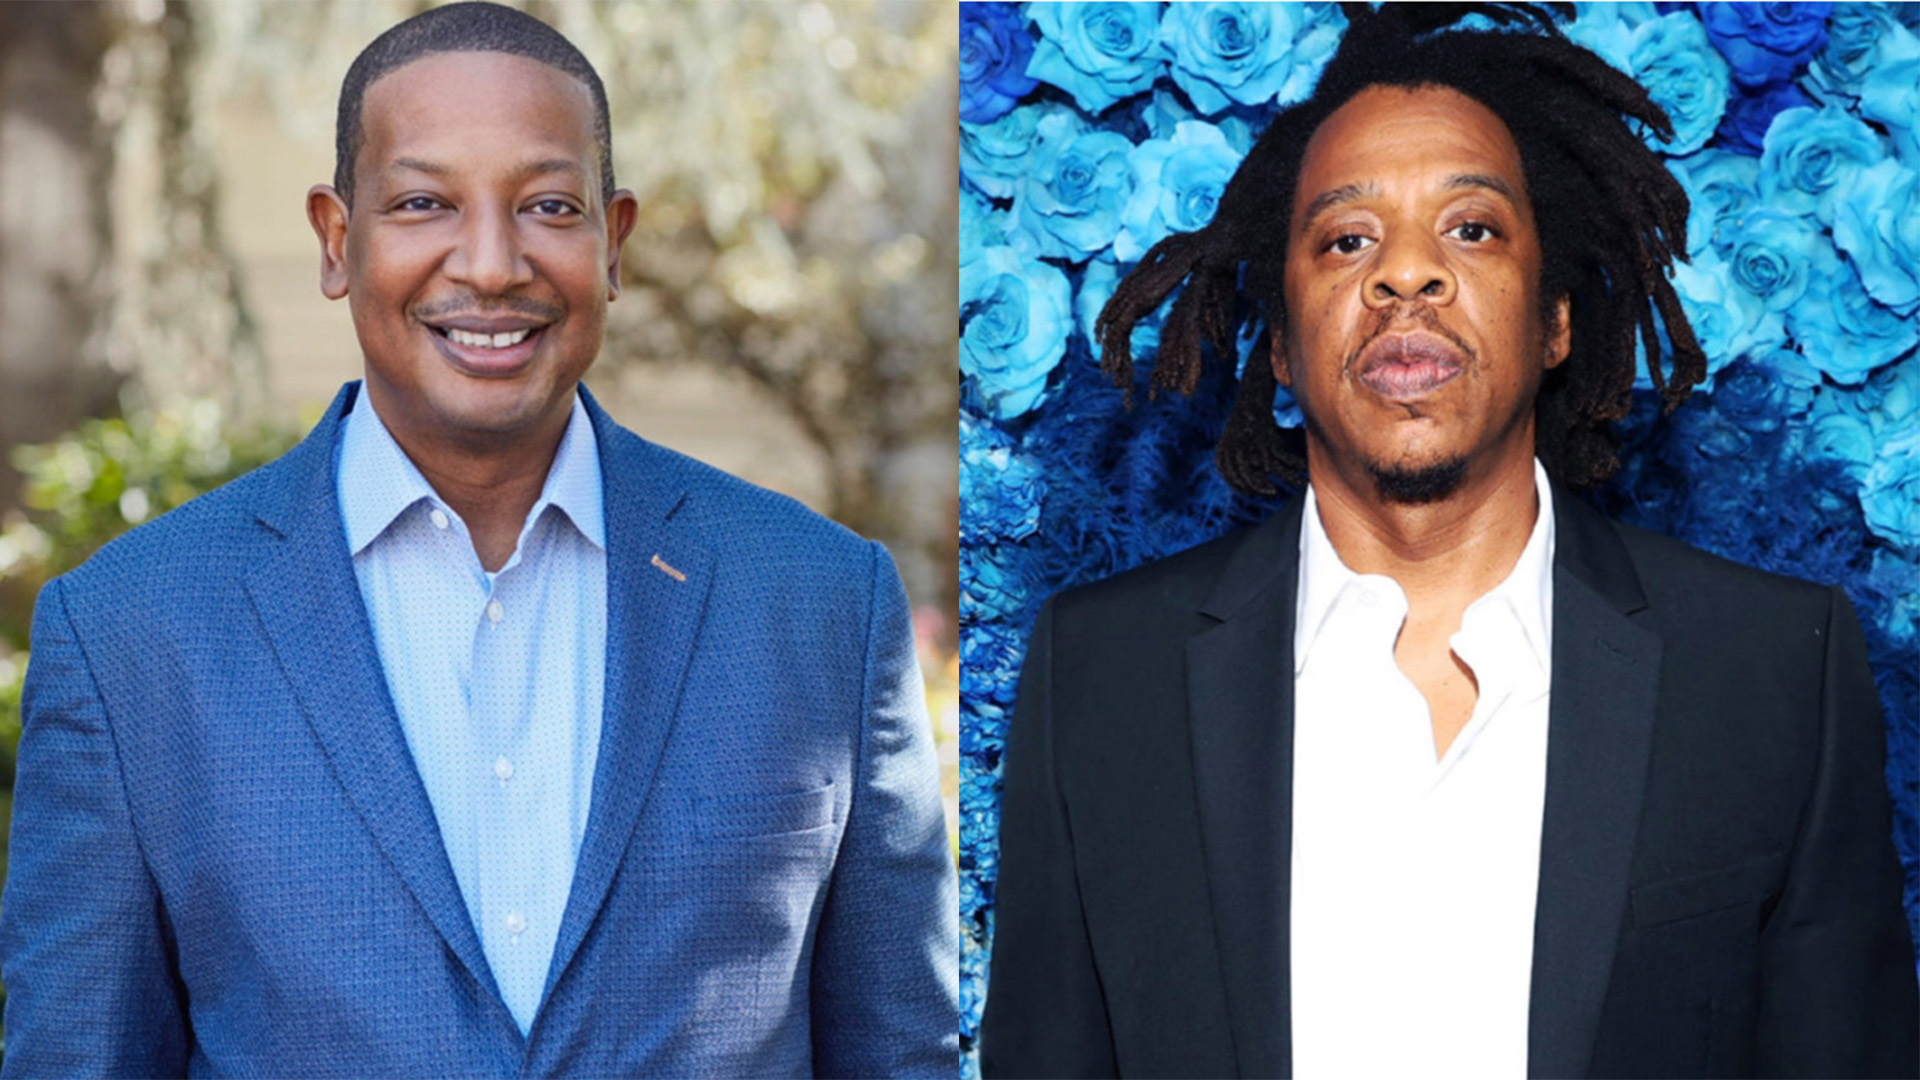 The Parent Company, Jay-Z's Roc Nation And SC Branding Restructure The Terms Of Their Agreement